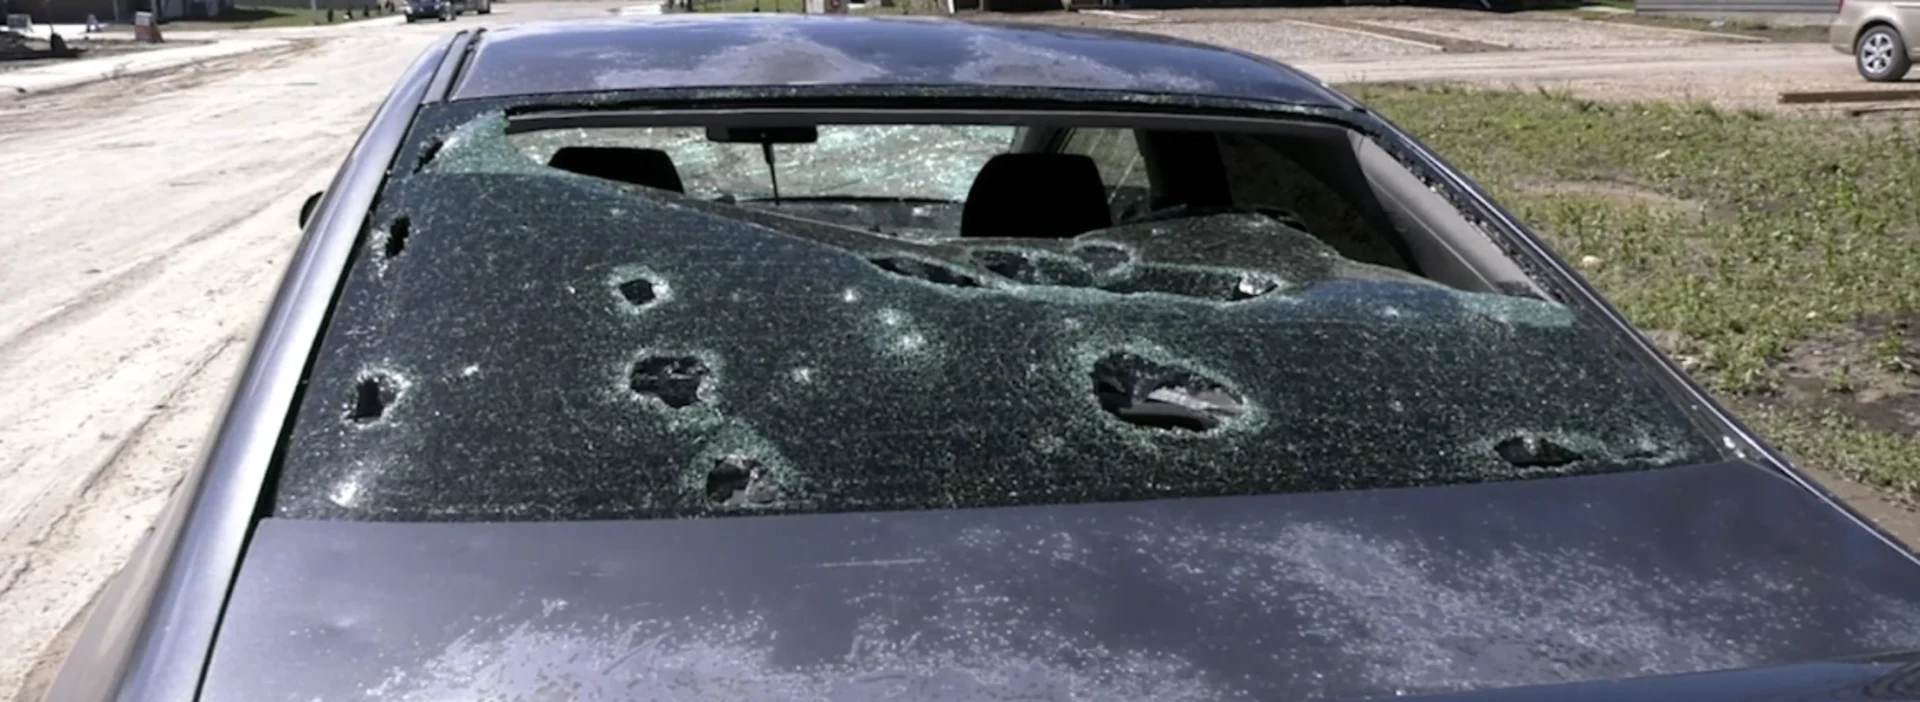 Peas, walnuts and golf balls: here’s what hailstone size means for damage